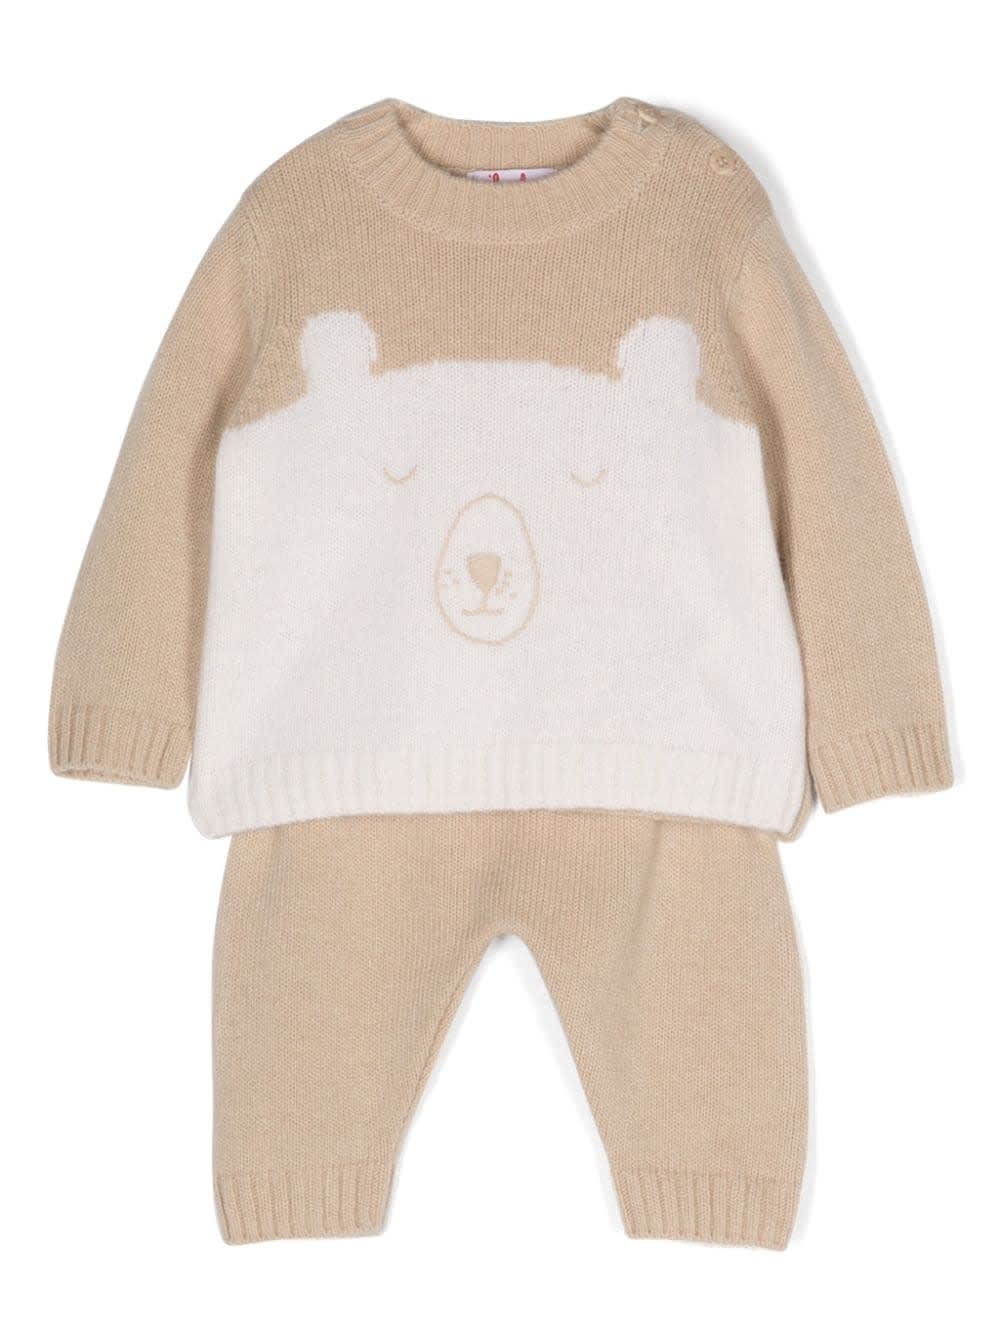 IL GUFO TWO PIECE TRICOT BABYSUIT WITH BABY BEAR IN MILK/BETLE